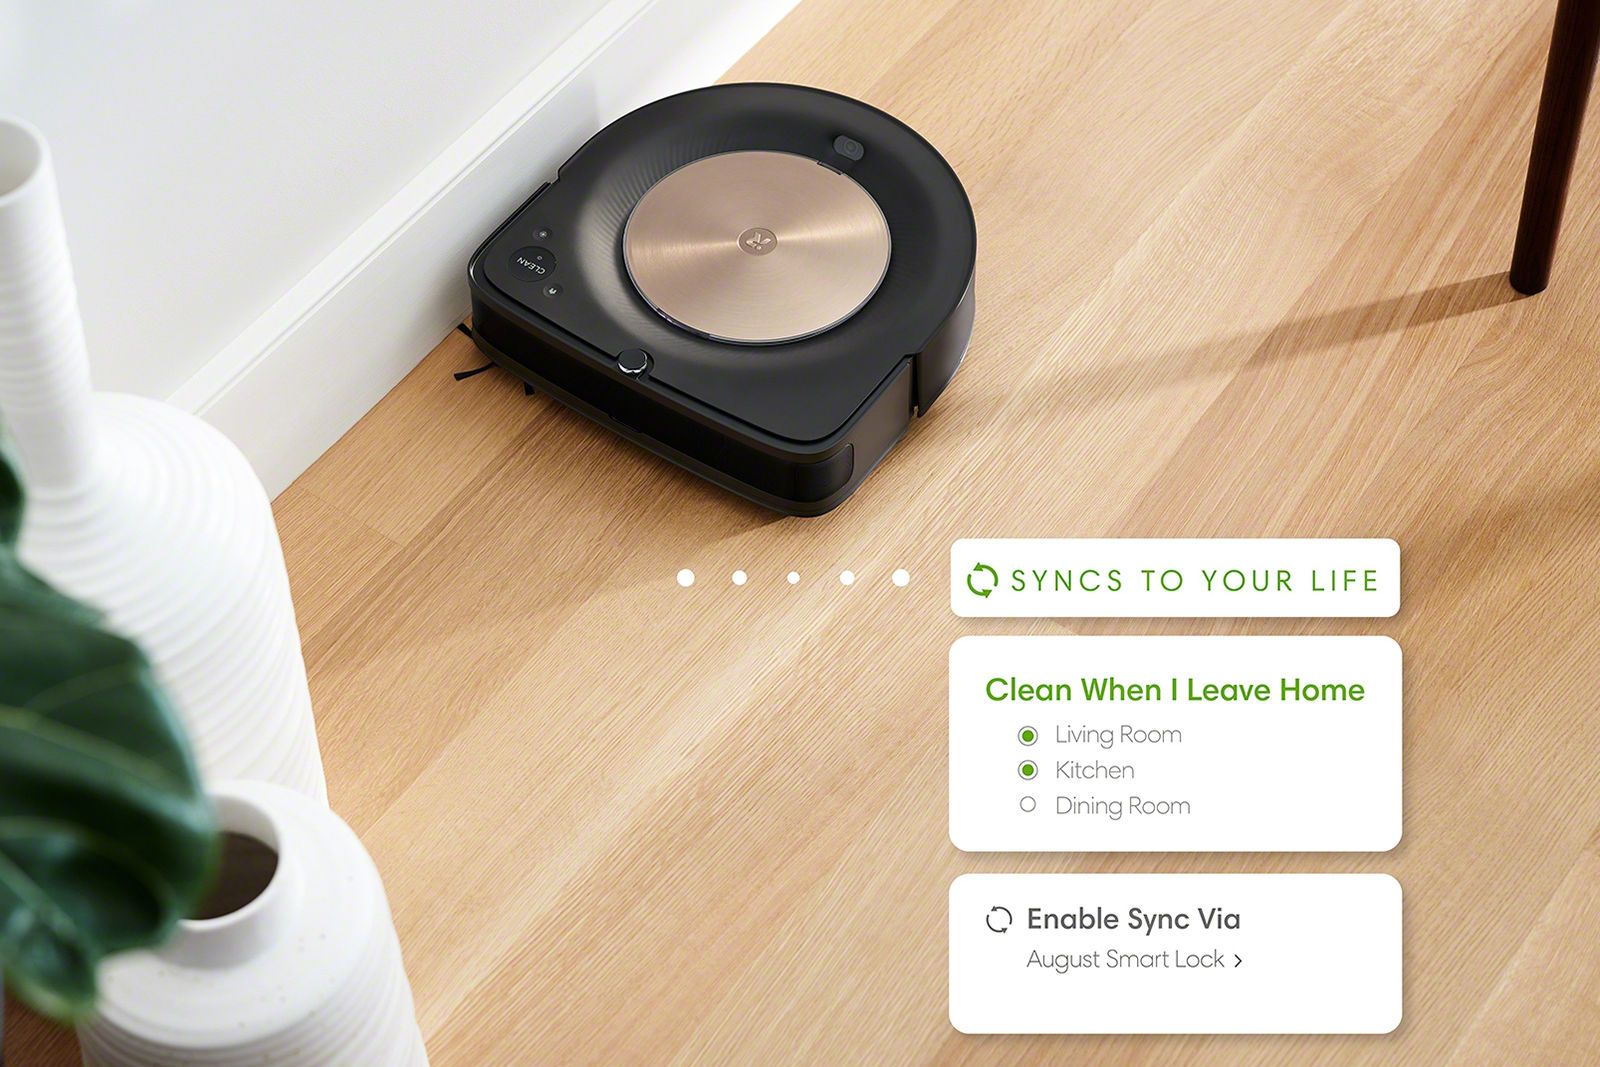 Roomba vacuums are getting smarter with the latest app update photo 1